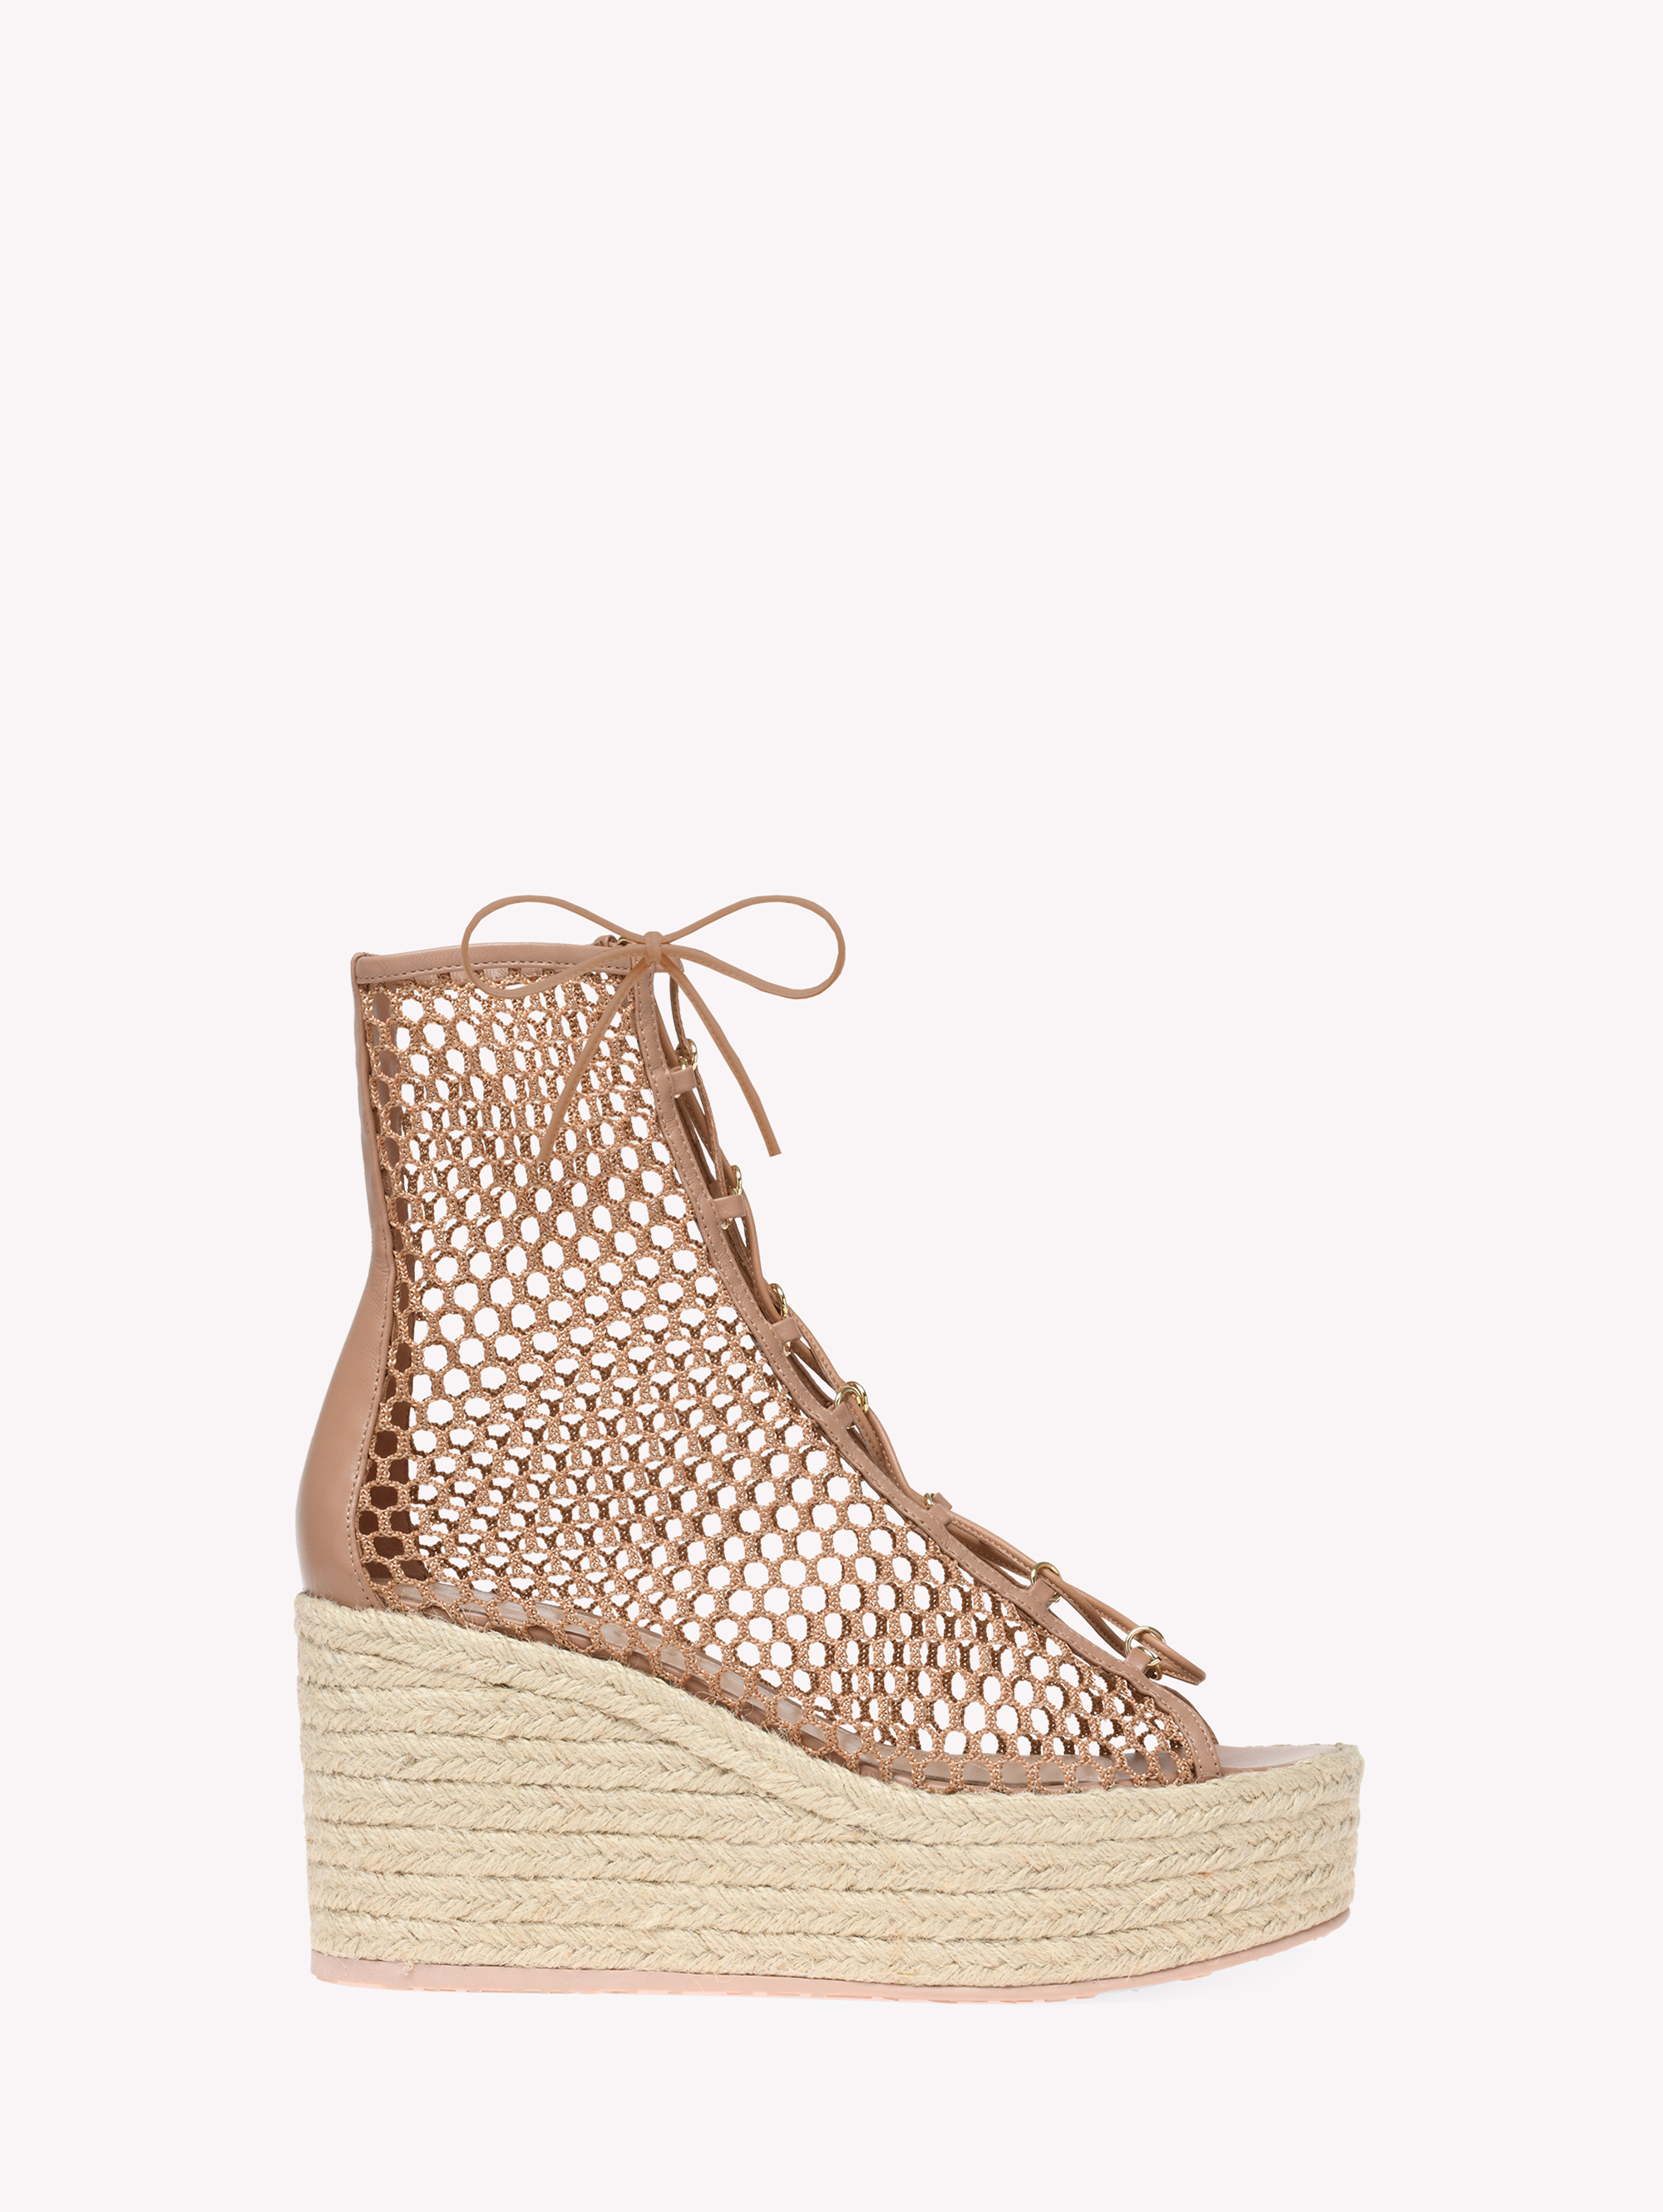 Buy HELENA WEDGE 45 for CAD 1200.00 | Gianvito Rossi Global